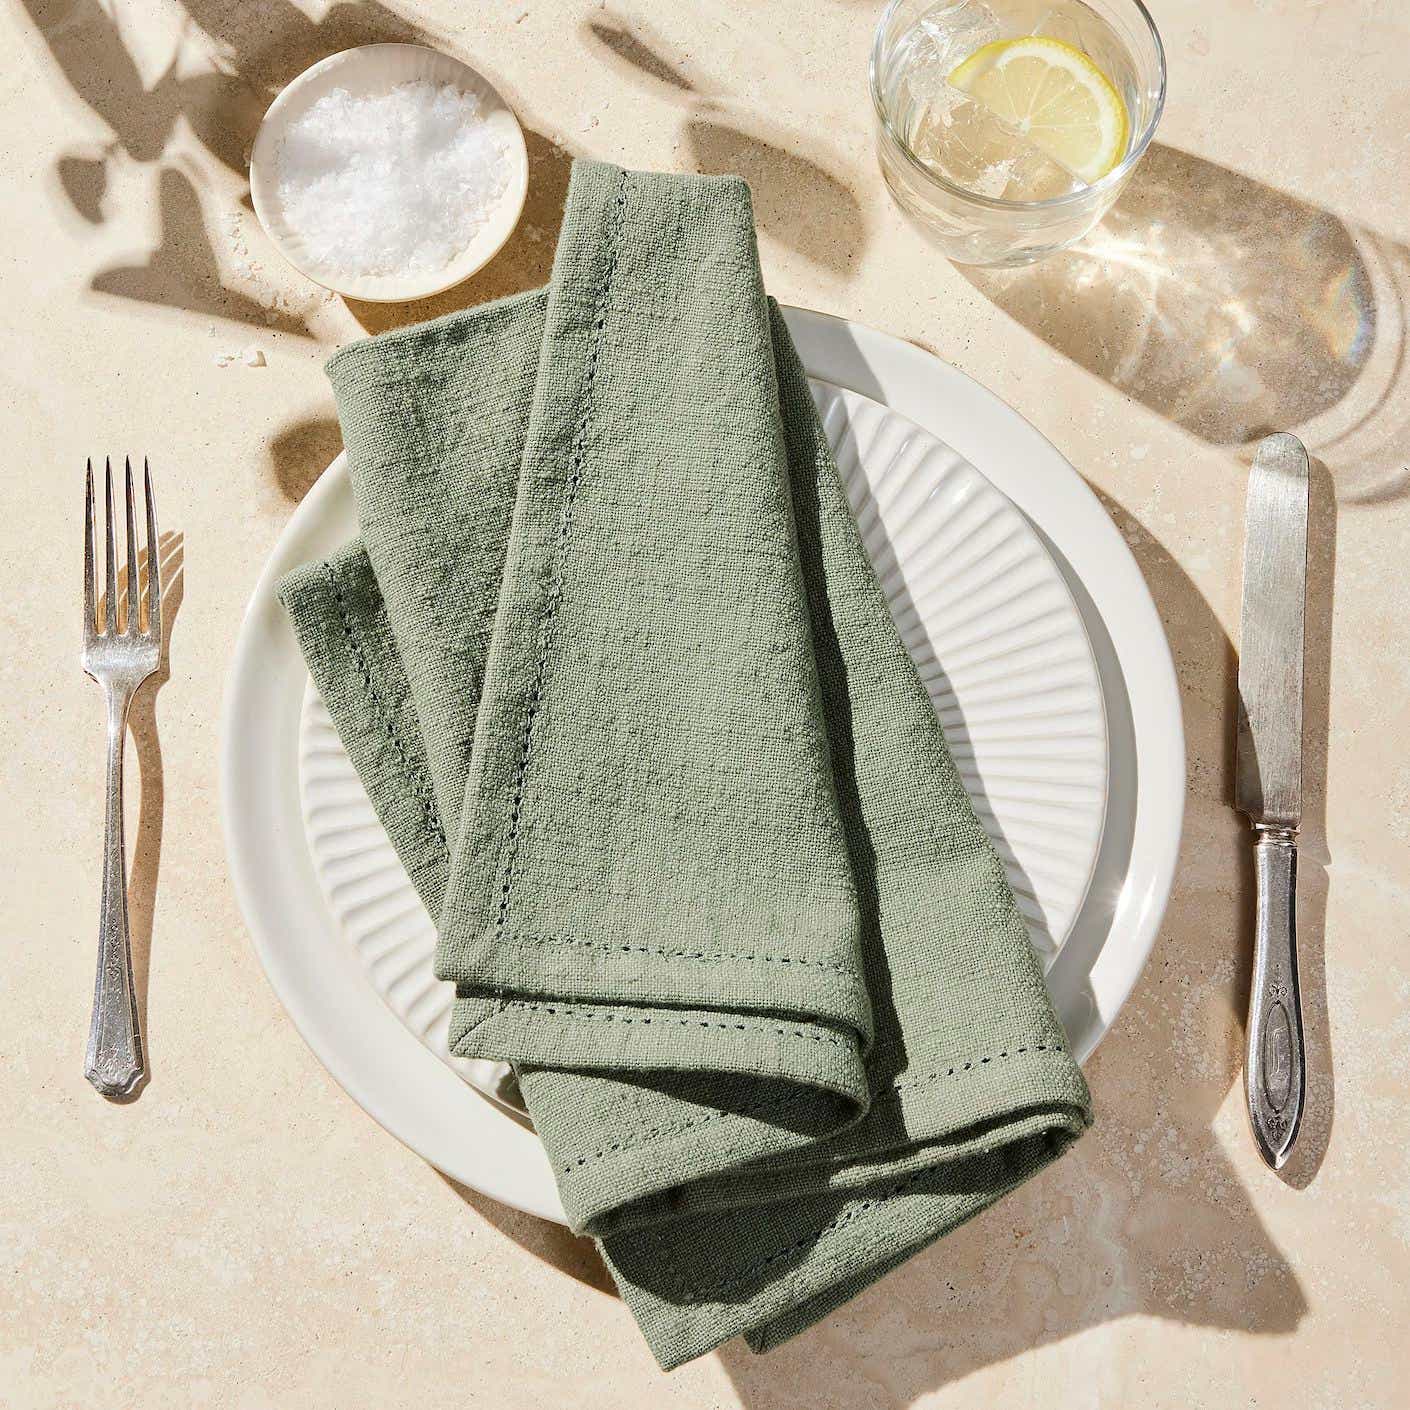 A sage green napkin is folded neatly on a white plate that sits on a cream table cloth.